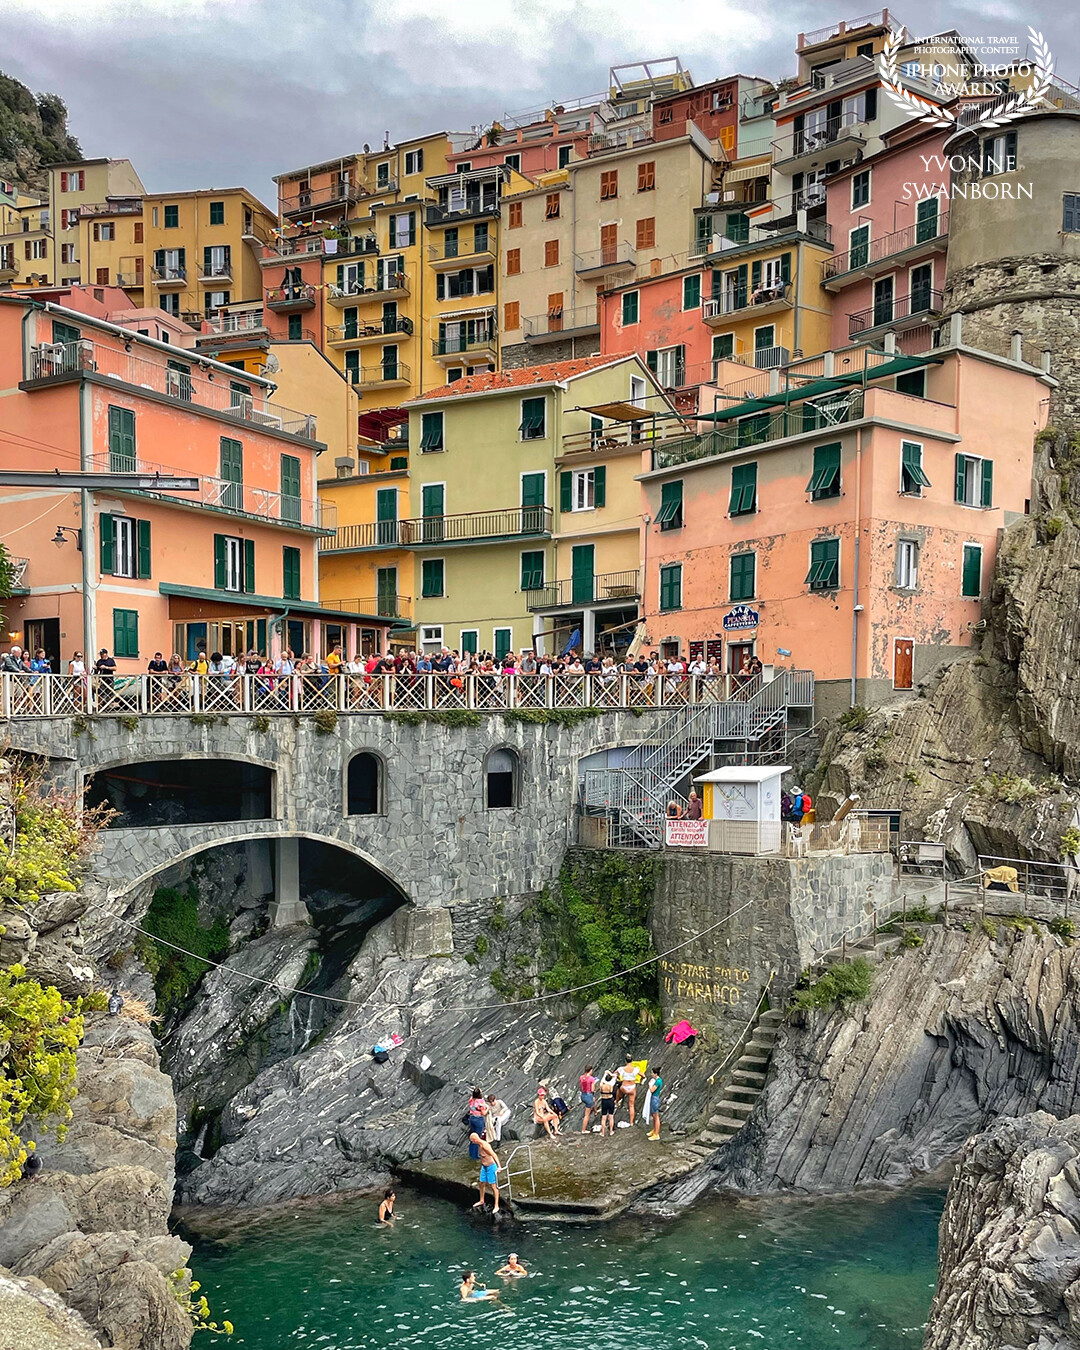 The five villages of the Cinque Terre were on my bucketlist. These villages are only reachable by train or boat. They can be recognized by the colorful houses built against the mountain.